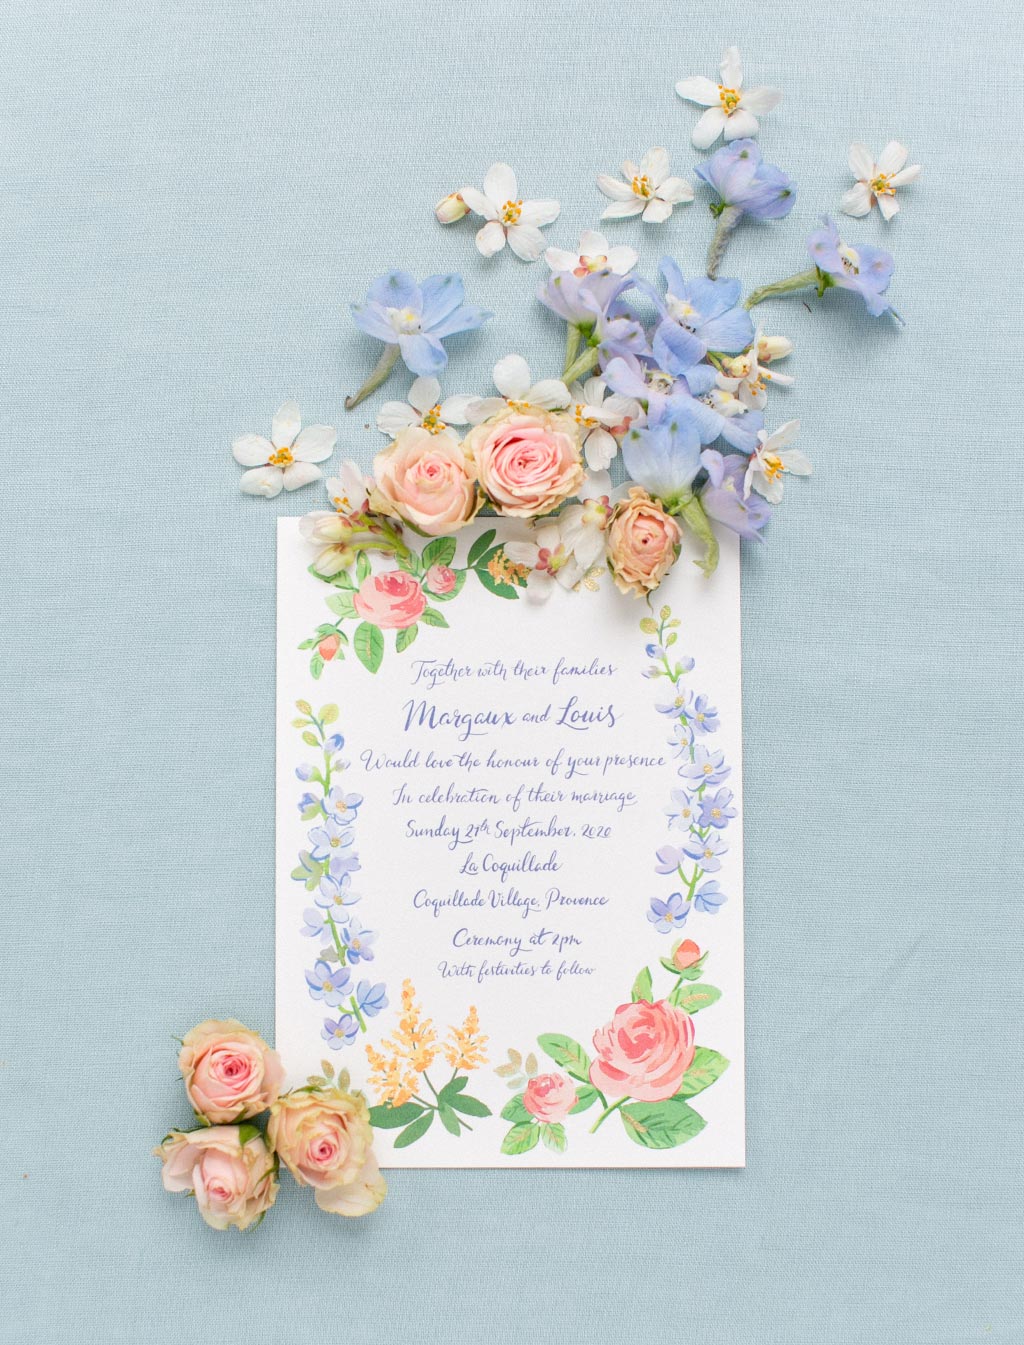 Where to find inspiration for your wedding stationery